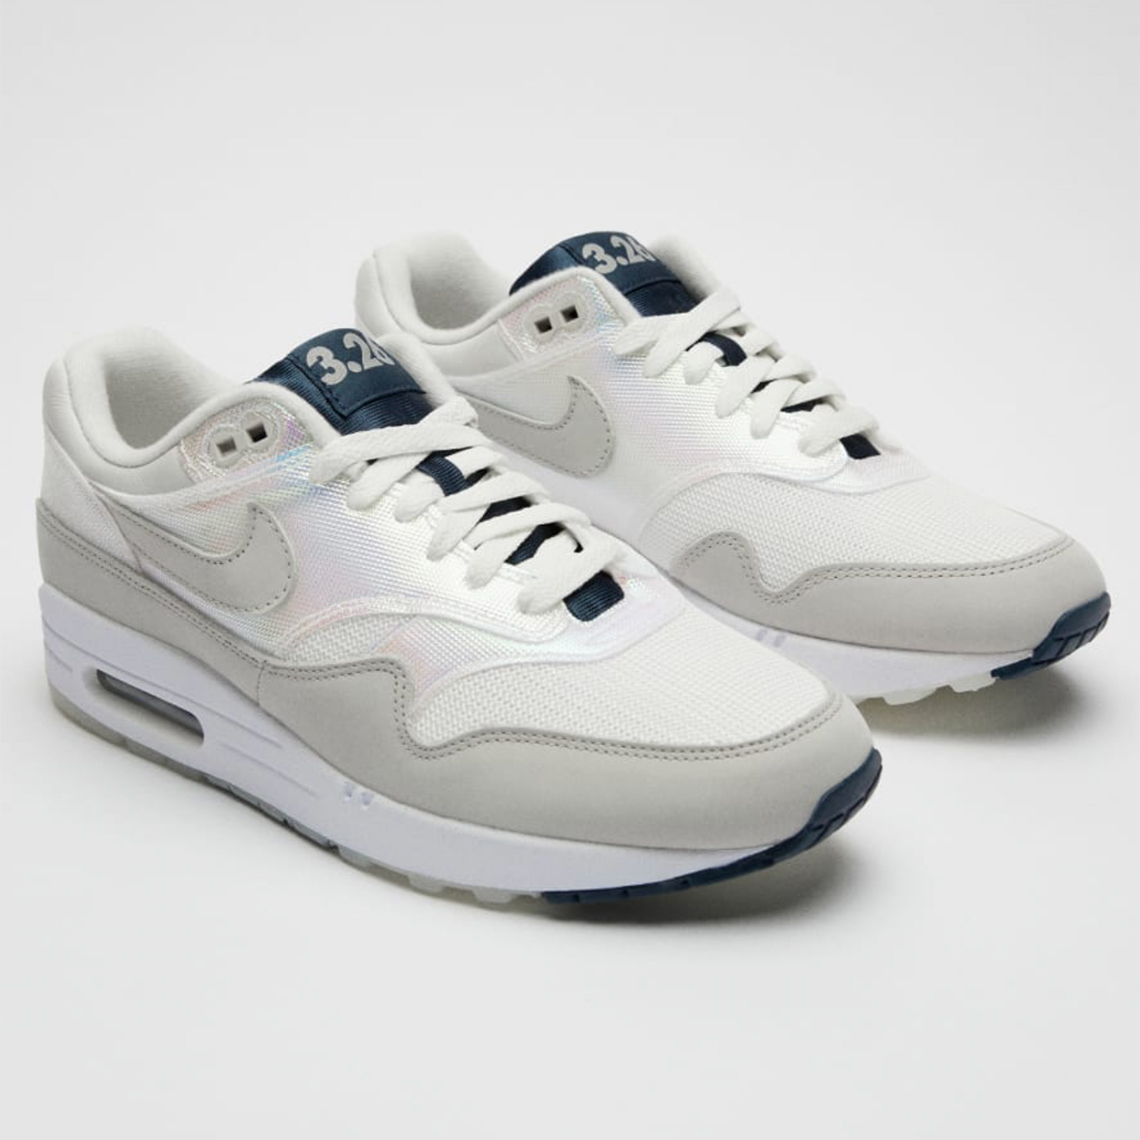 Nike Air Max Day 2022 - How to Shop Nike Air Max Day Sneakers